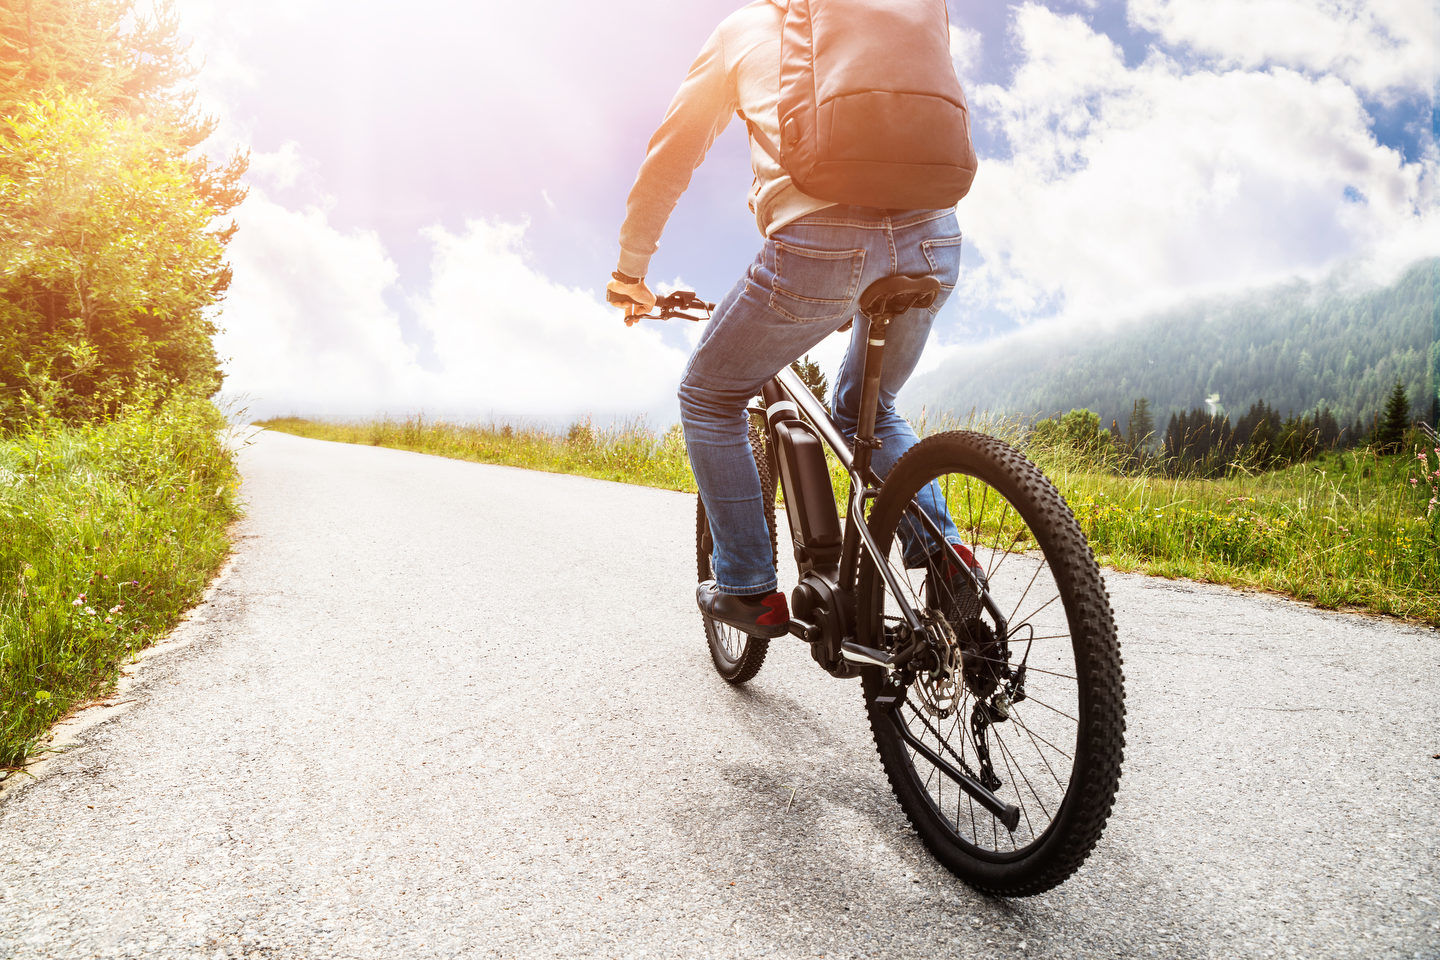 Why should you consider buying an e-bike this summer?